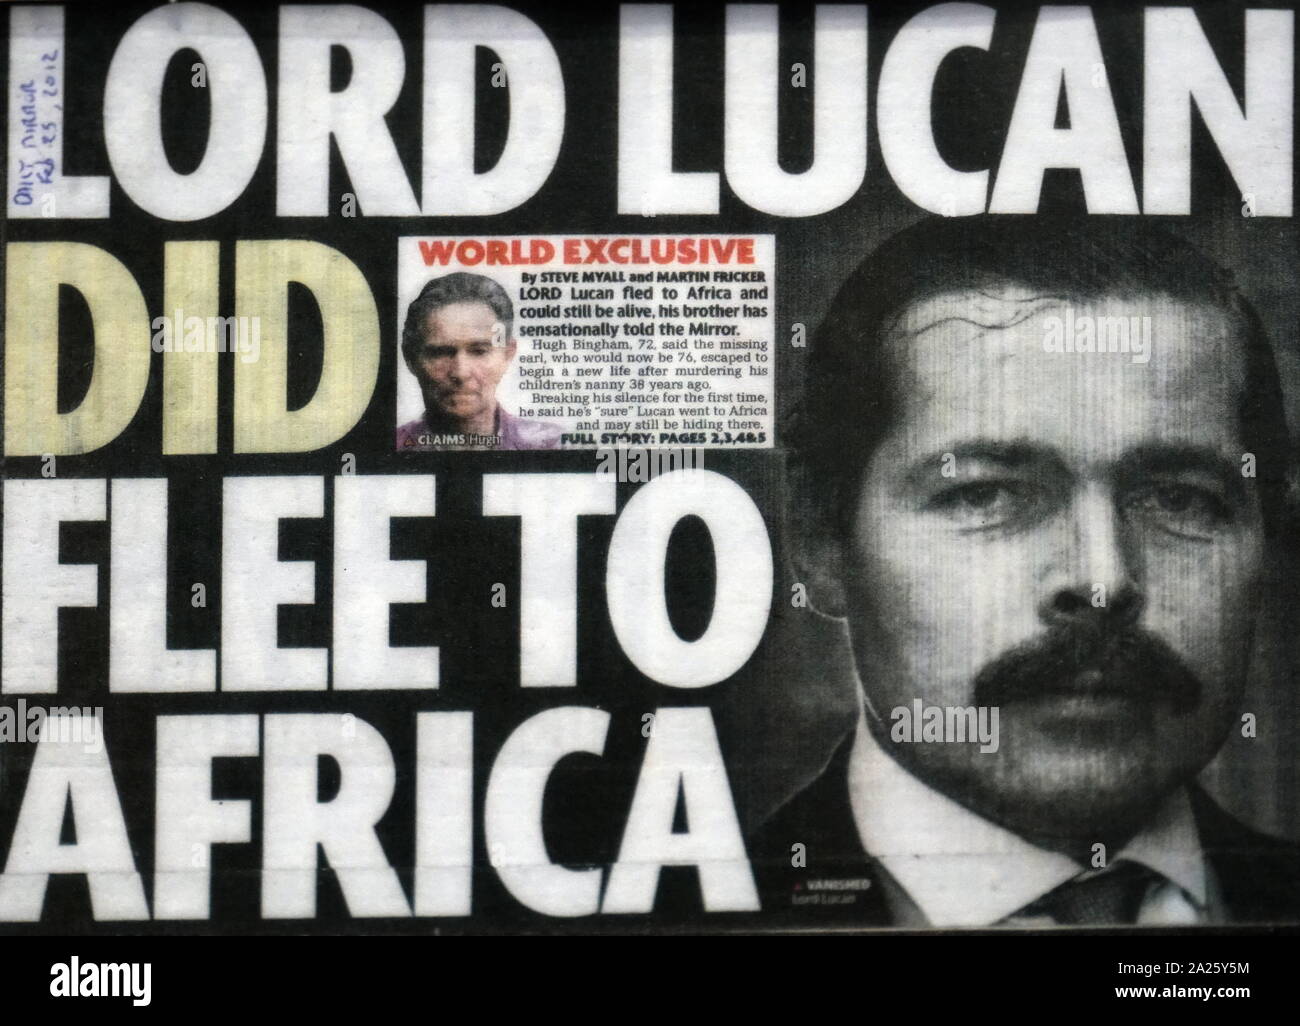 Newspaper headline reporting on Lord Lucan. Richard John Bingham, 7th Earl of Lucan (1934-1974) a British peer who disappeared after being suspected of murder. Stock Photo